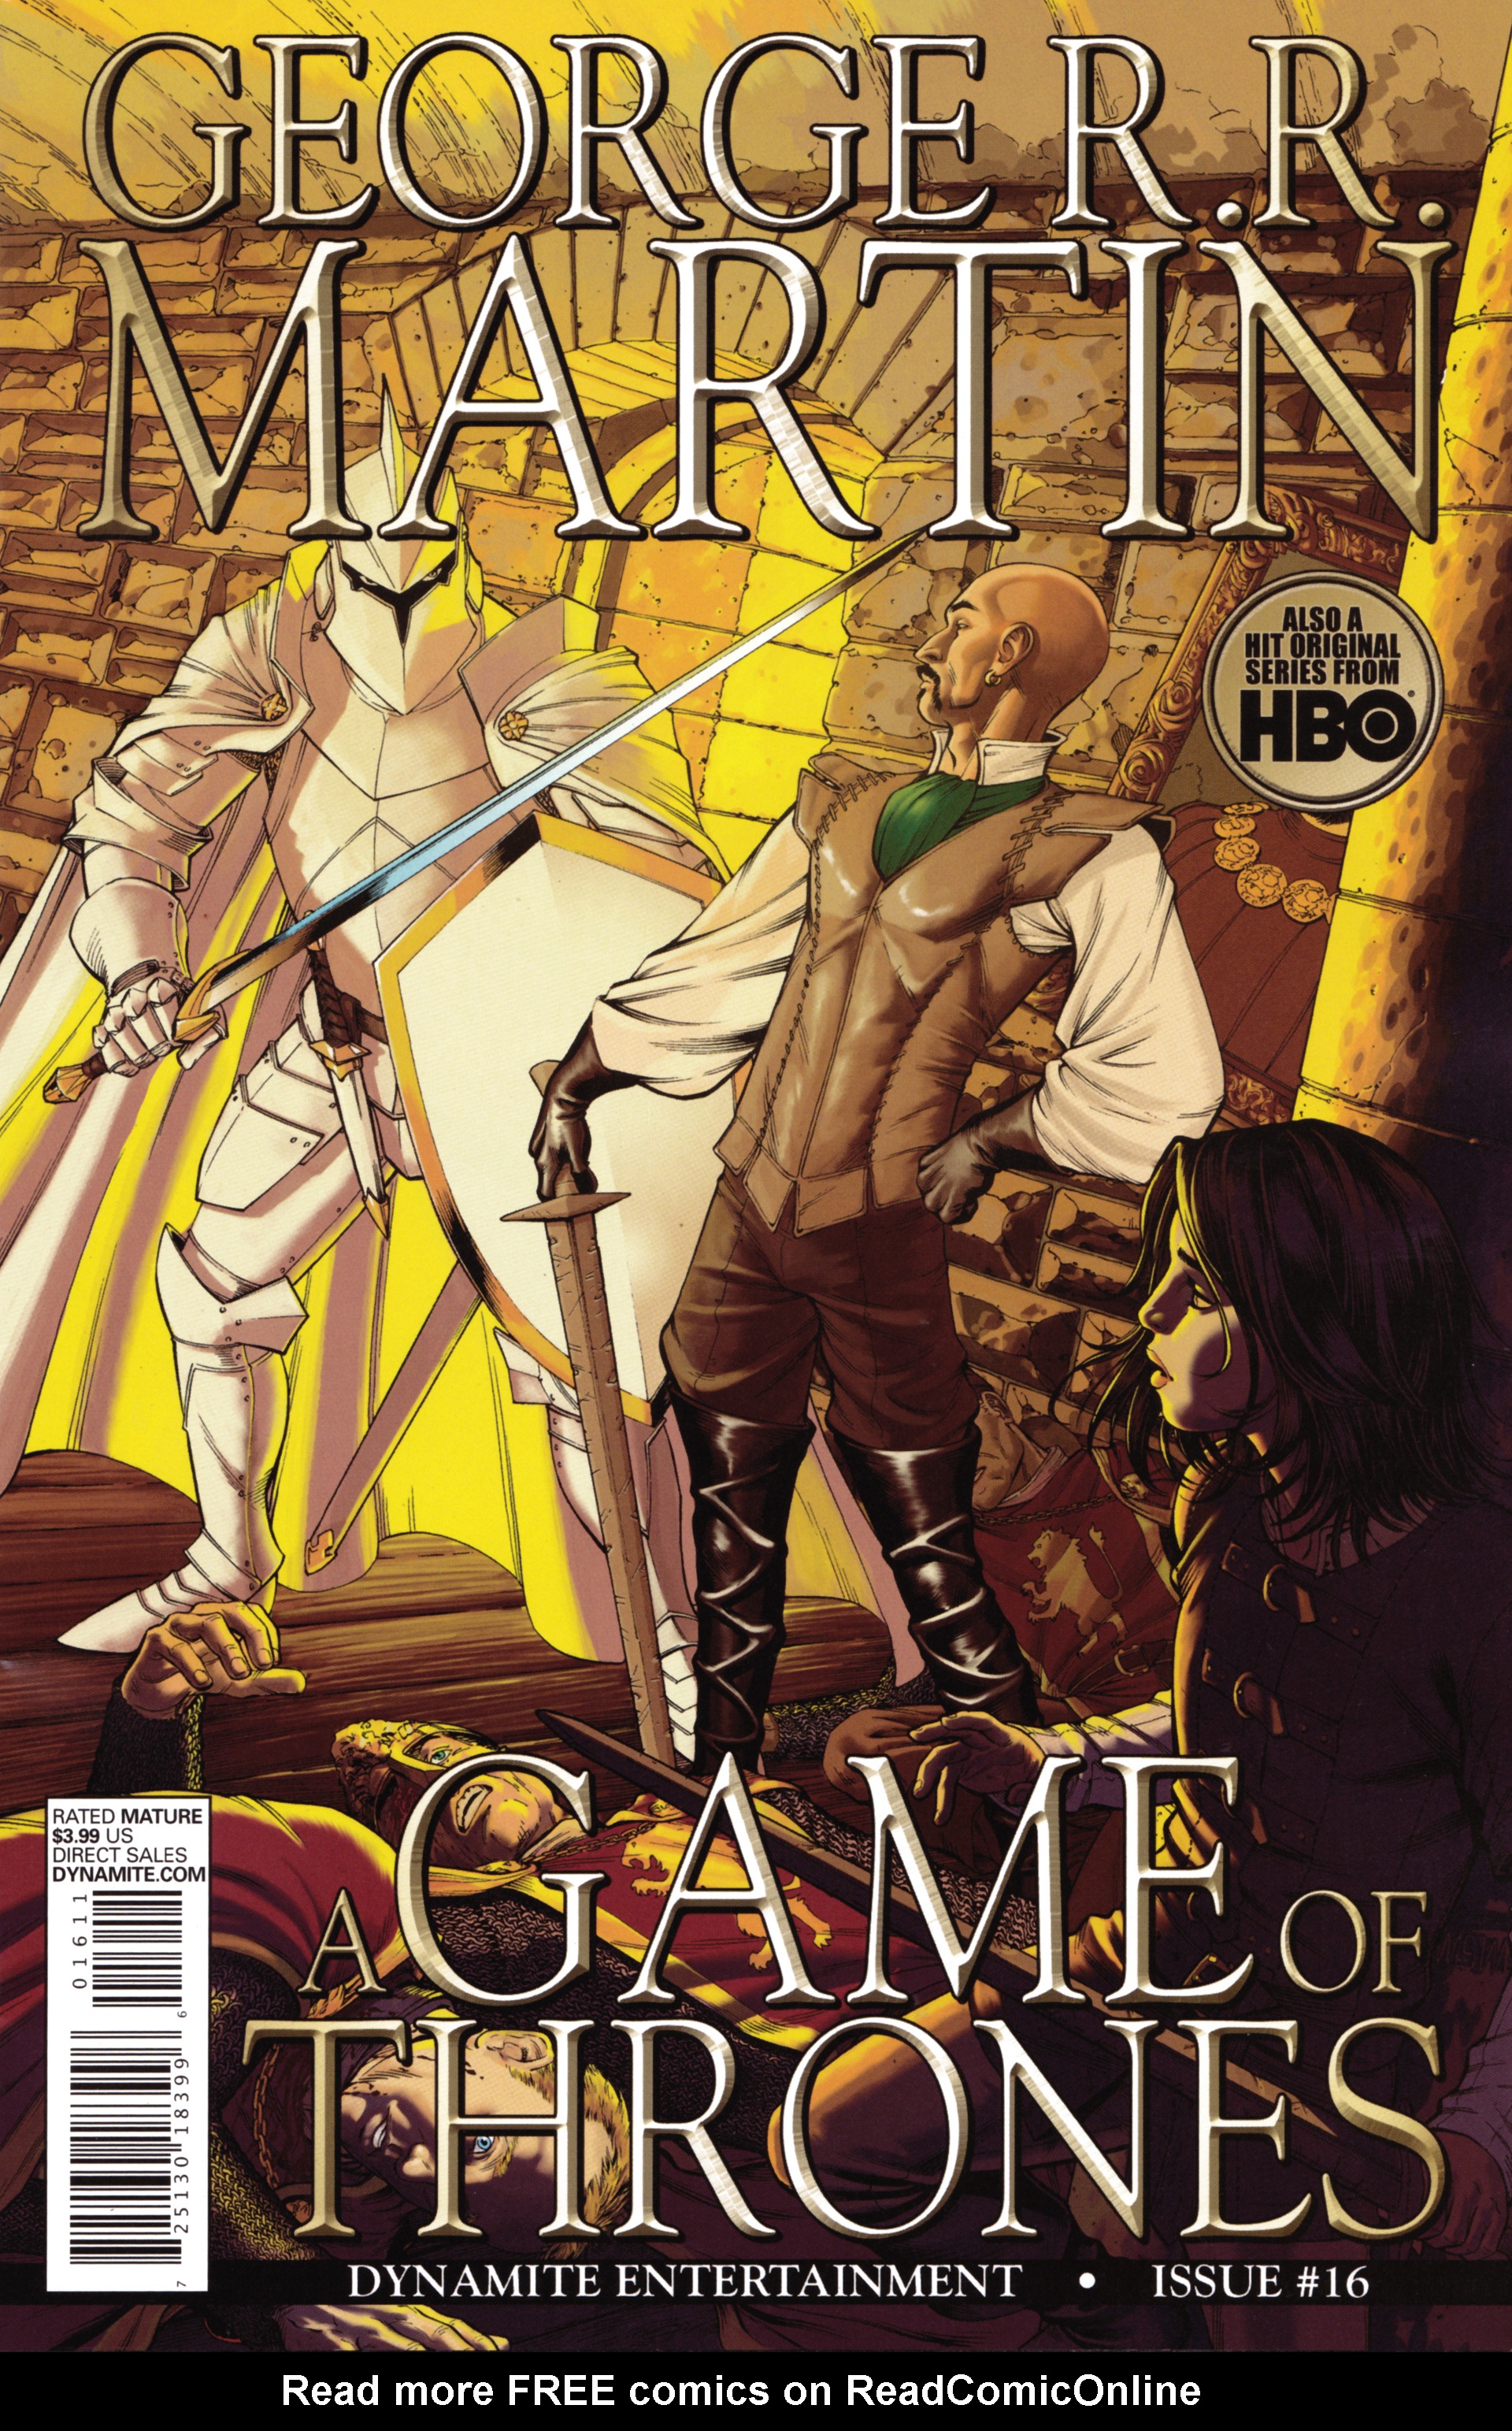 Read game of thrones online free